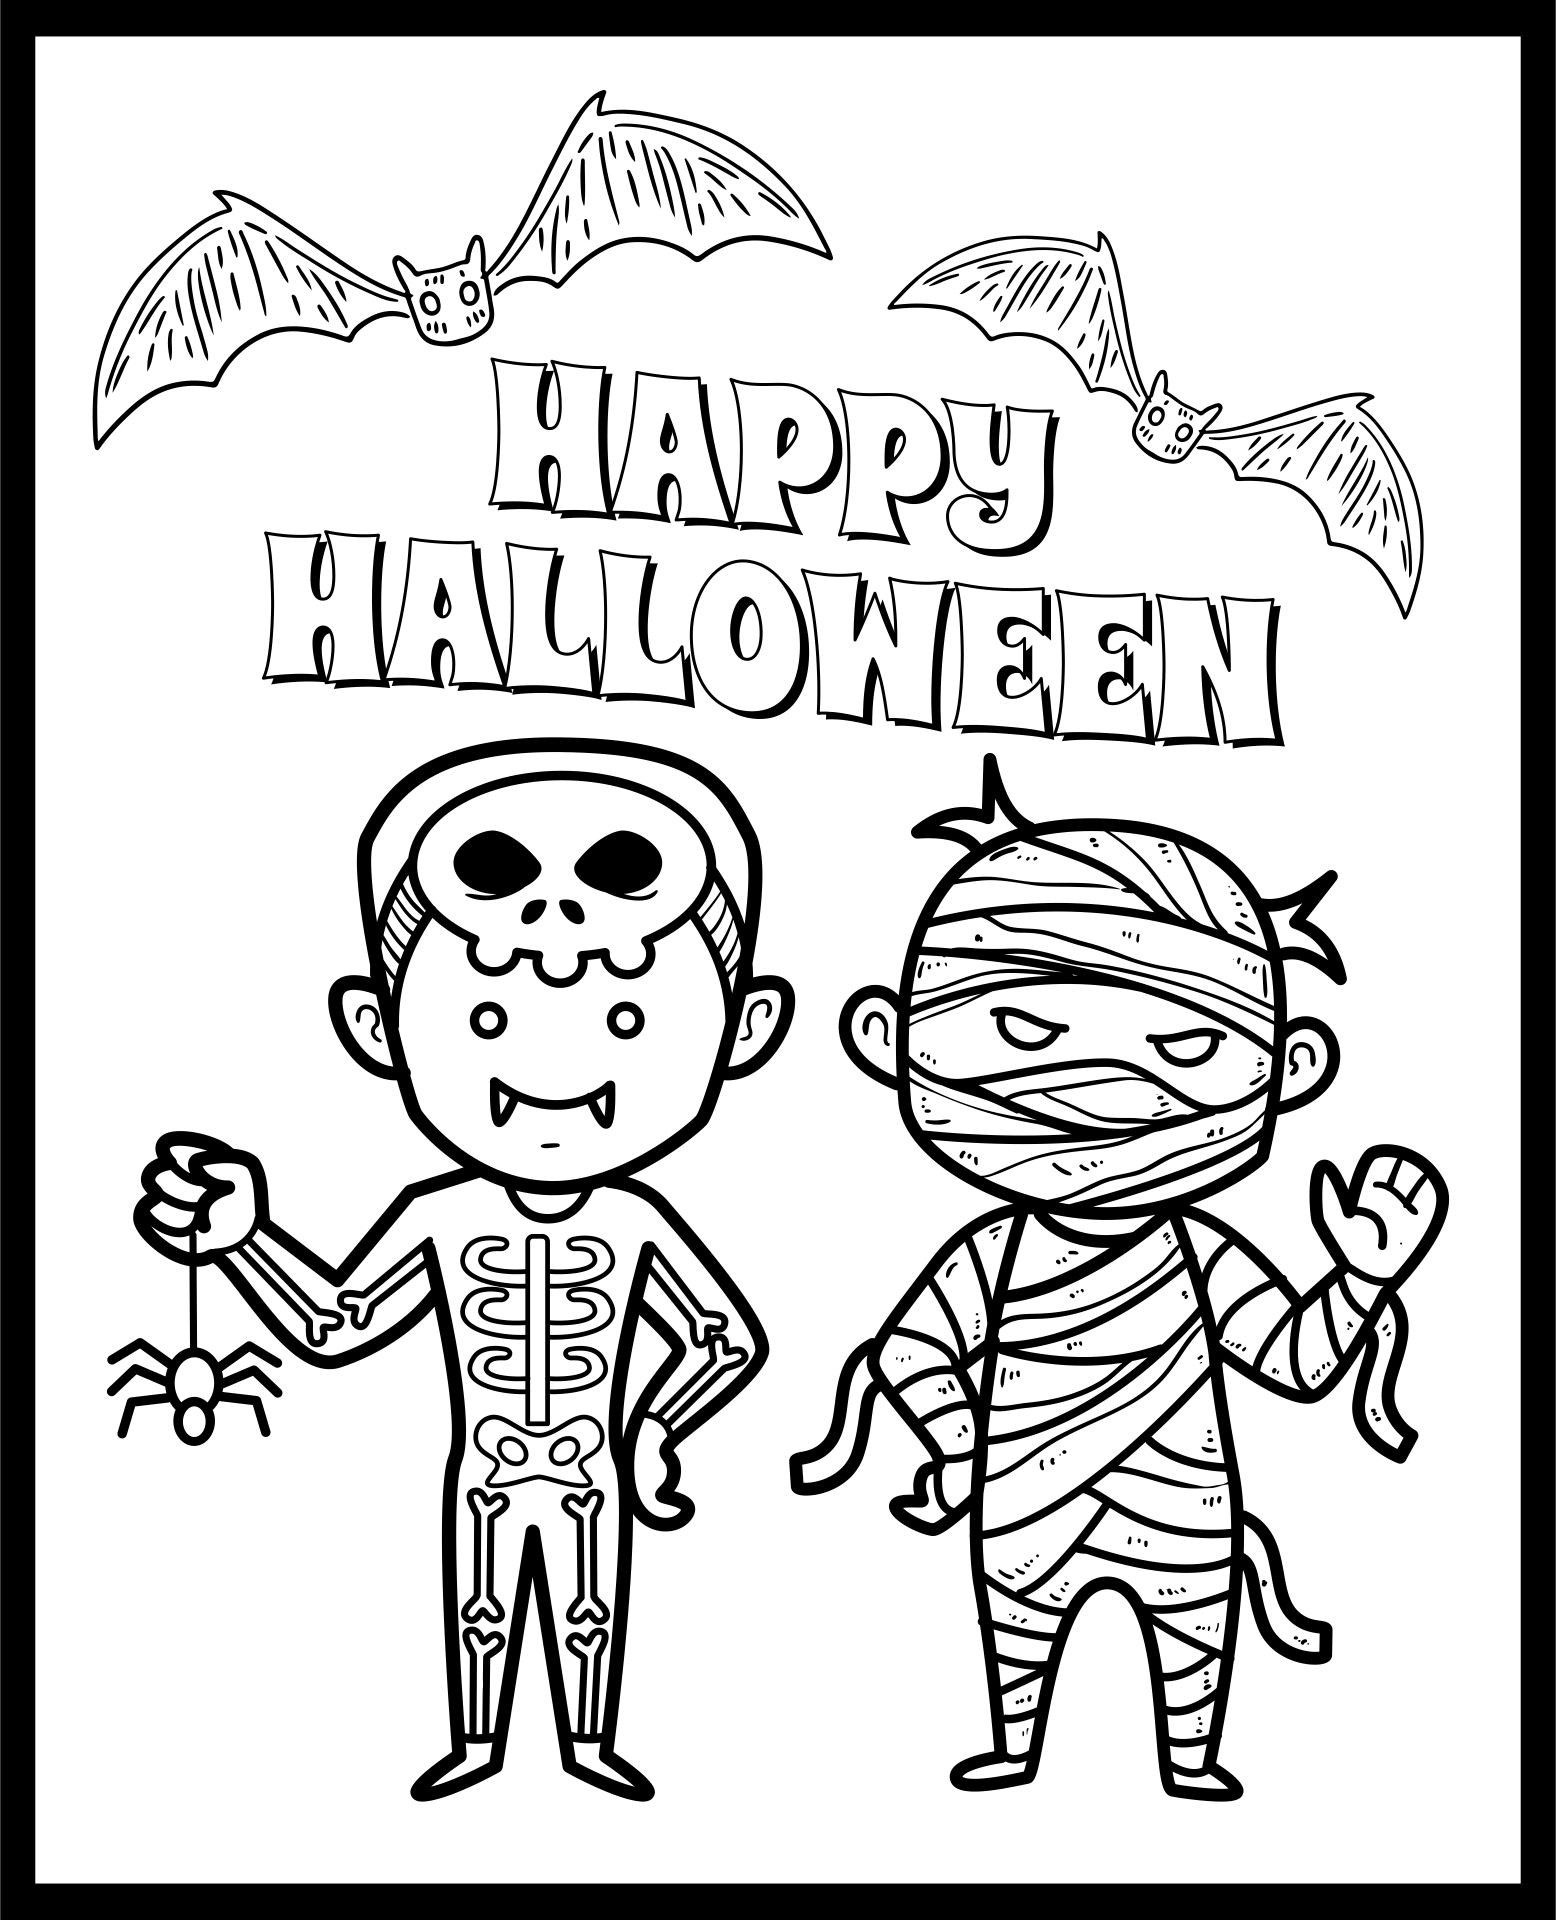 15-best-halloween-printable-cards-to-color-pdf-for-free-at-printablee